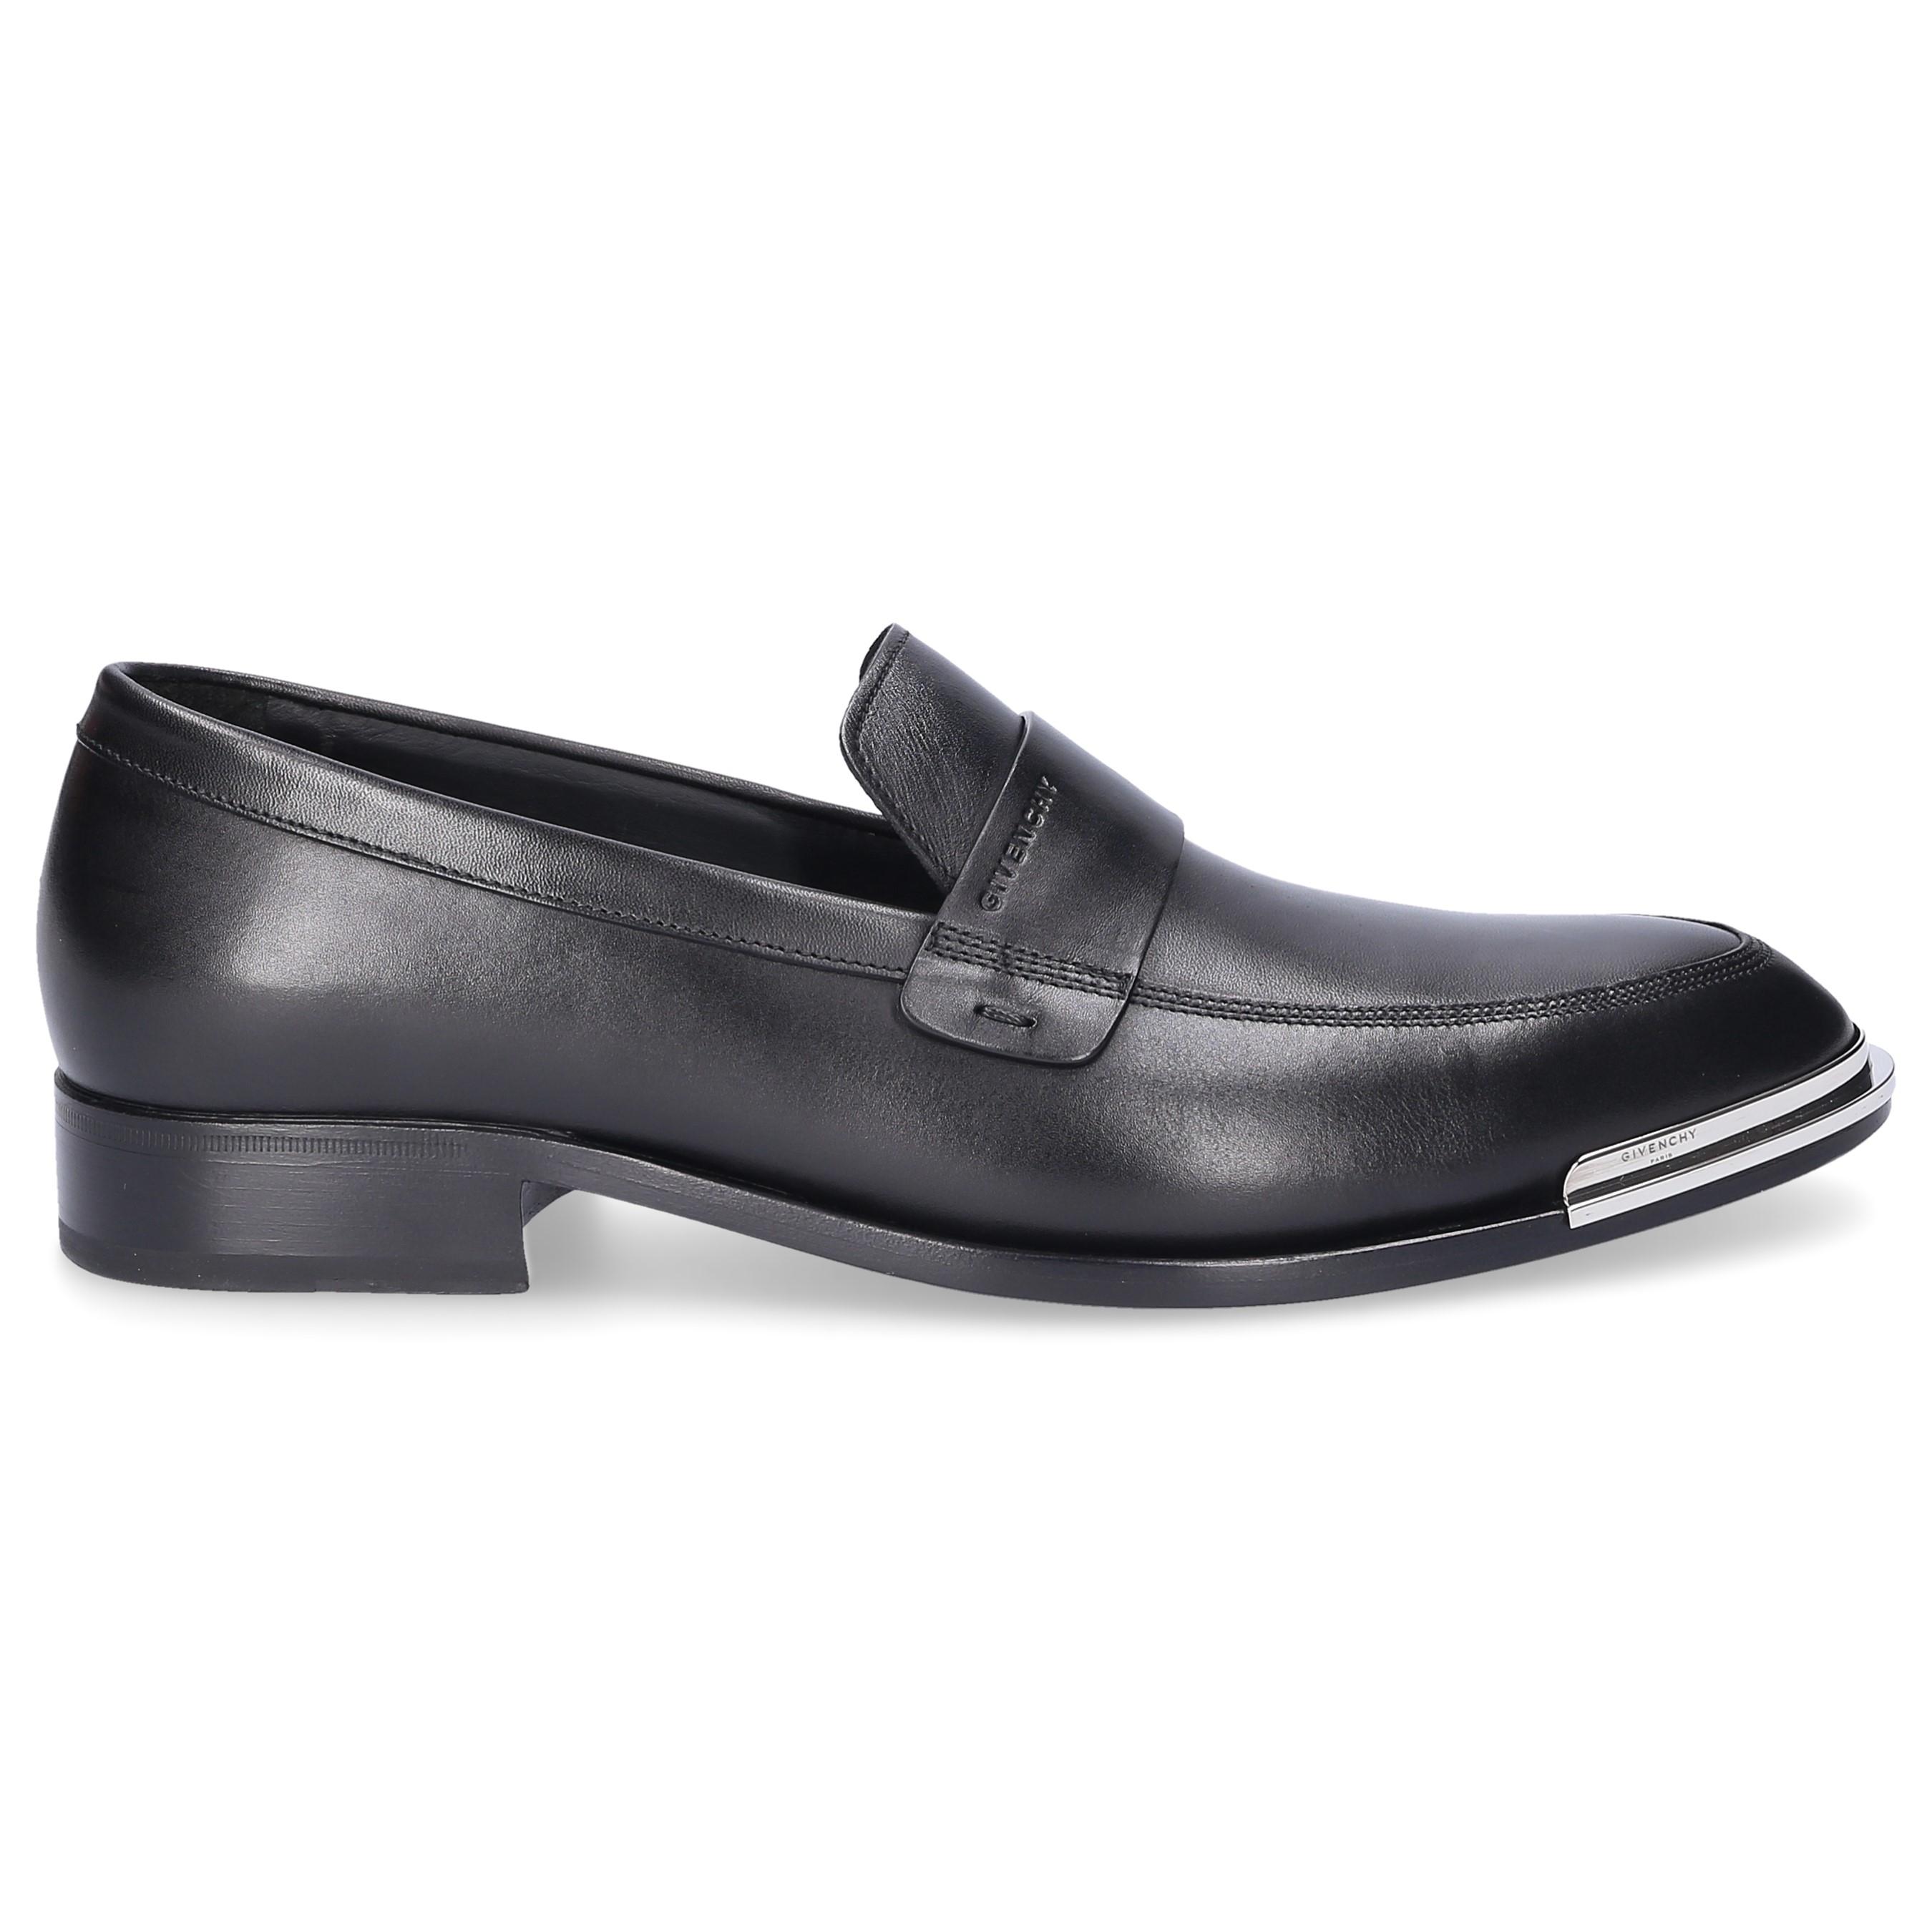 Givenchy Leather Loafers Loafer Classic in Black for Men - Lyst